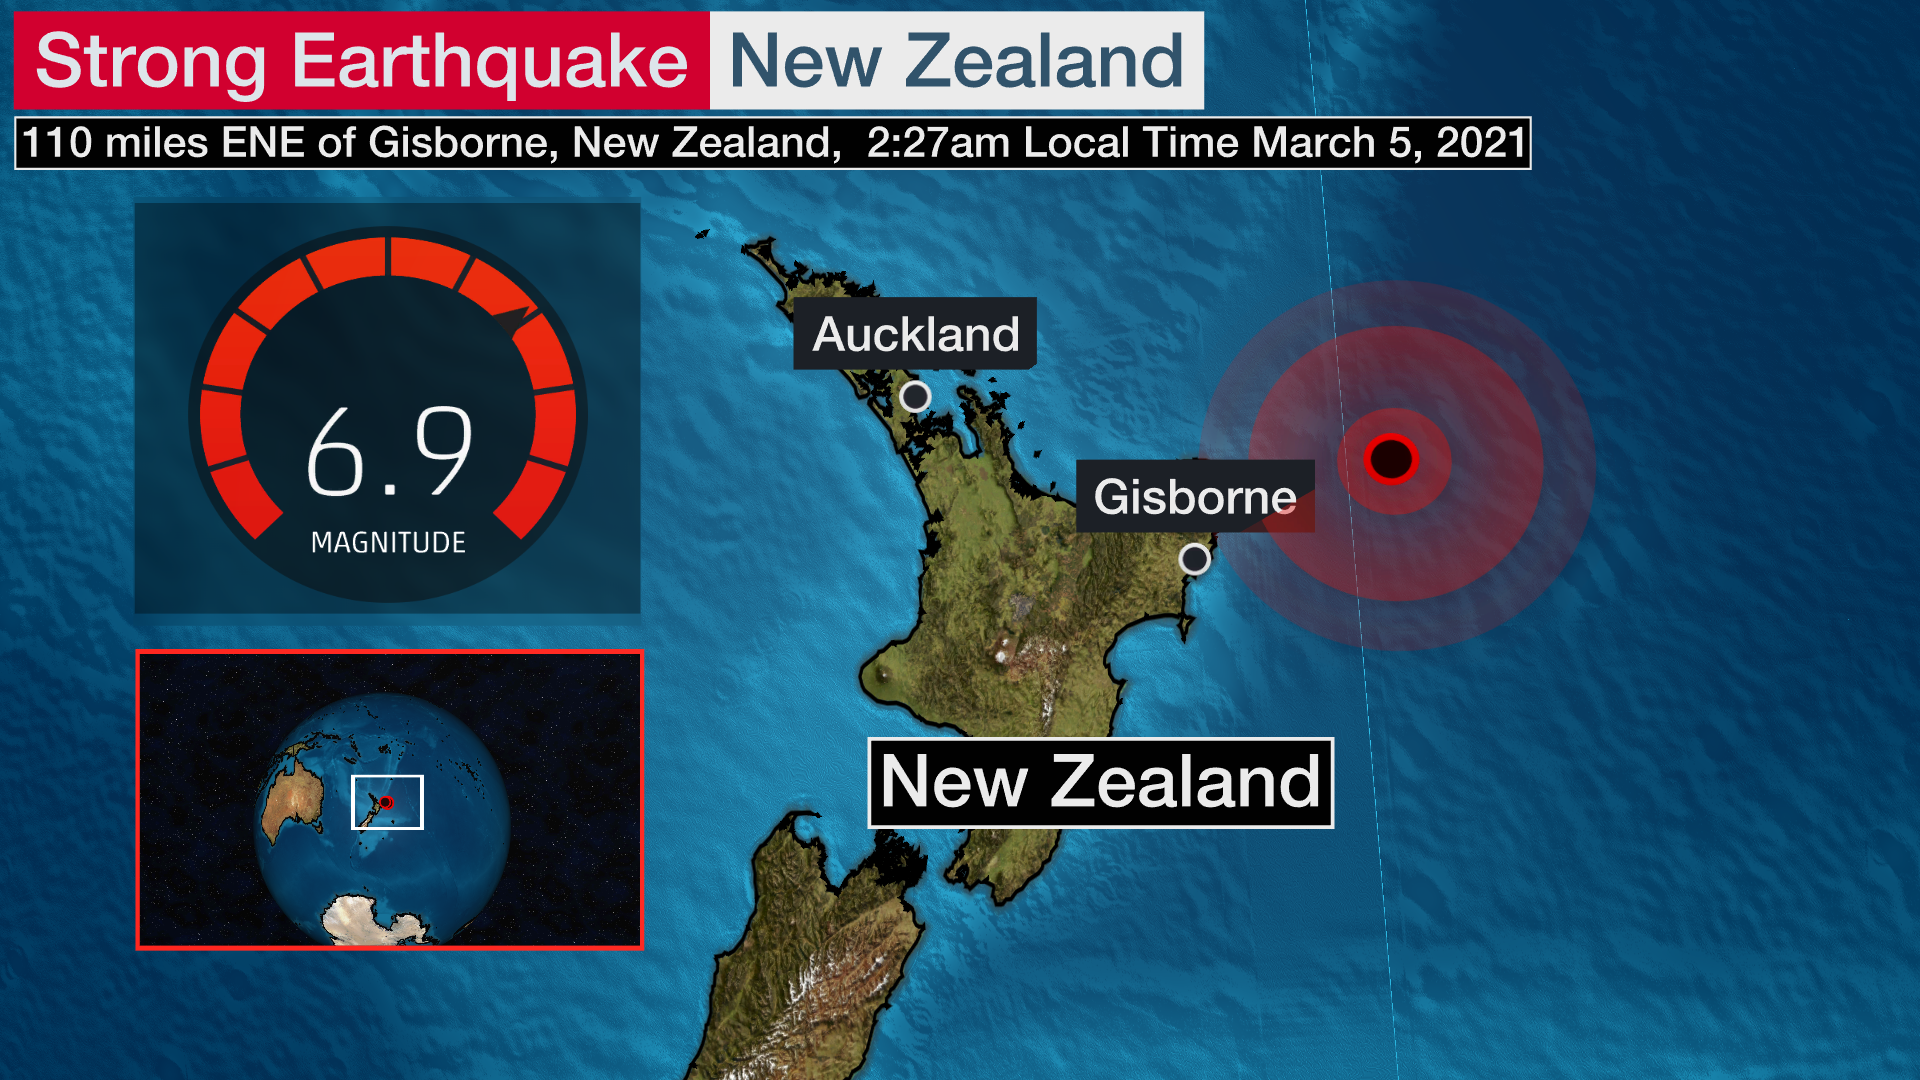 Tsunami Warning Lifted After Strong Earthquake Causes Severe Shaking in New Zealand | The Weather Channel - Articles from The Weather Channel | weather.com